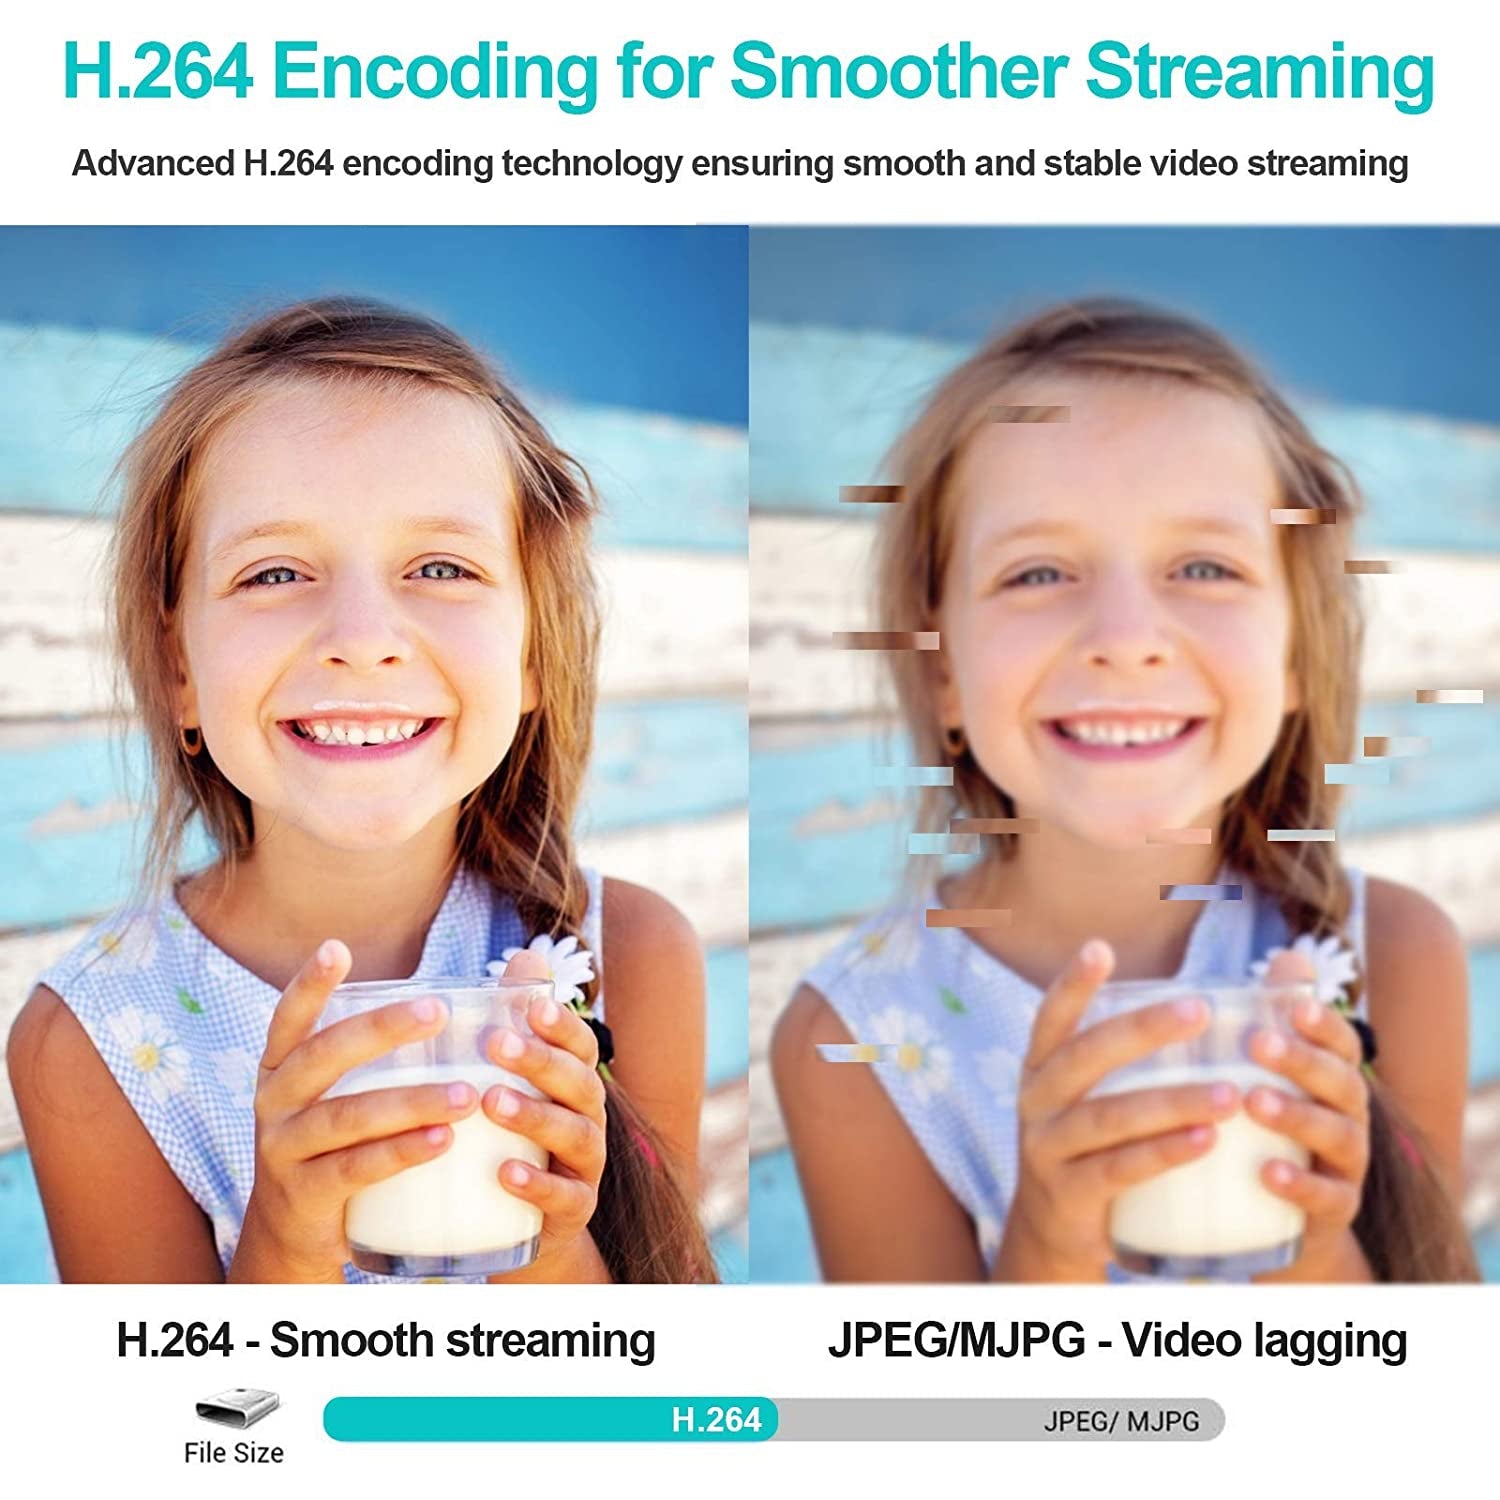 Webcam supports H.264 for smoother streaming, superior to JPEG/MJPG, eliminating video lag.